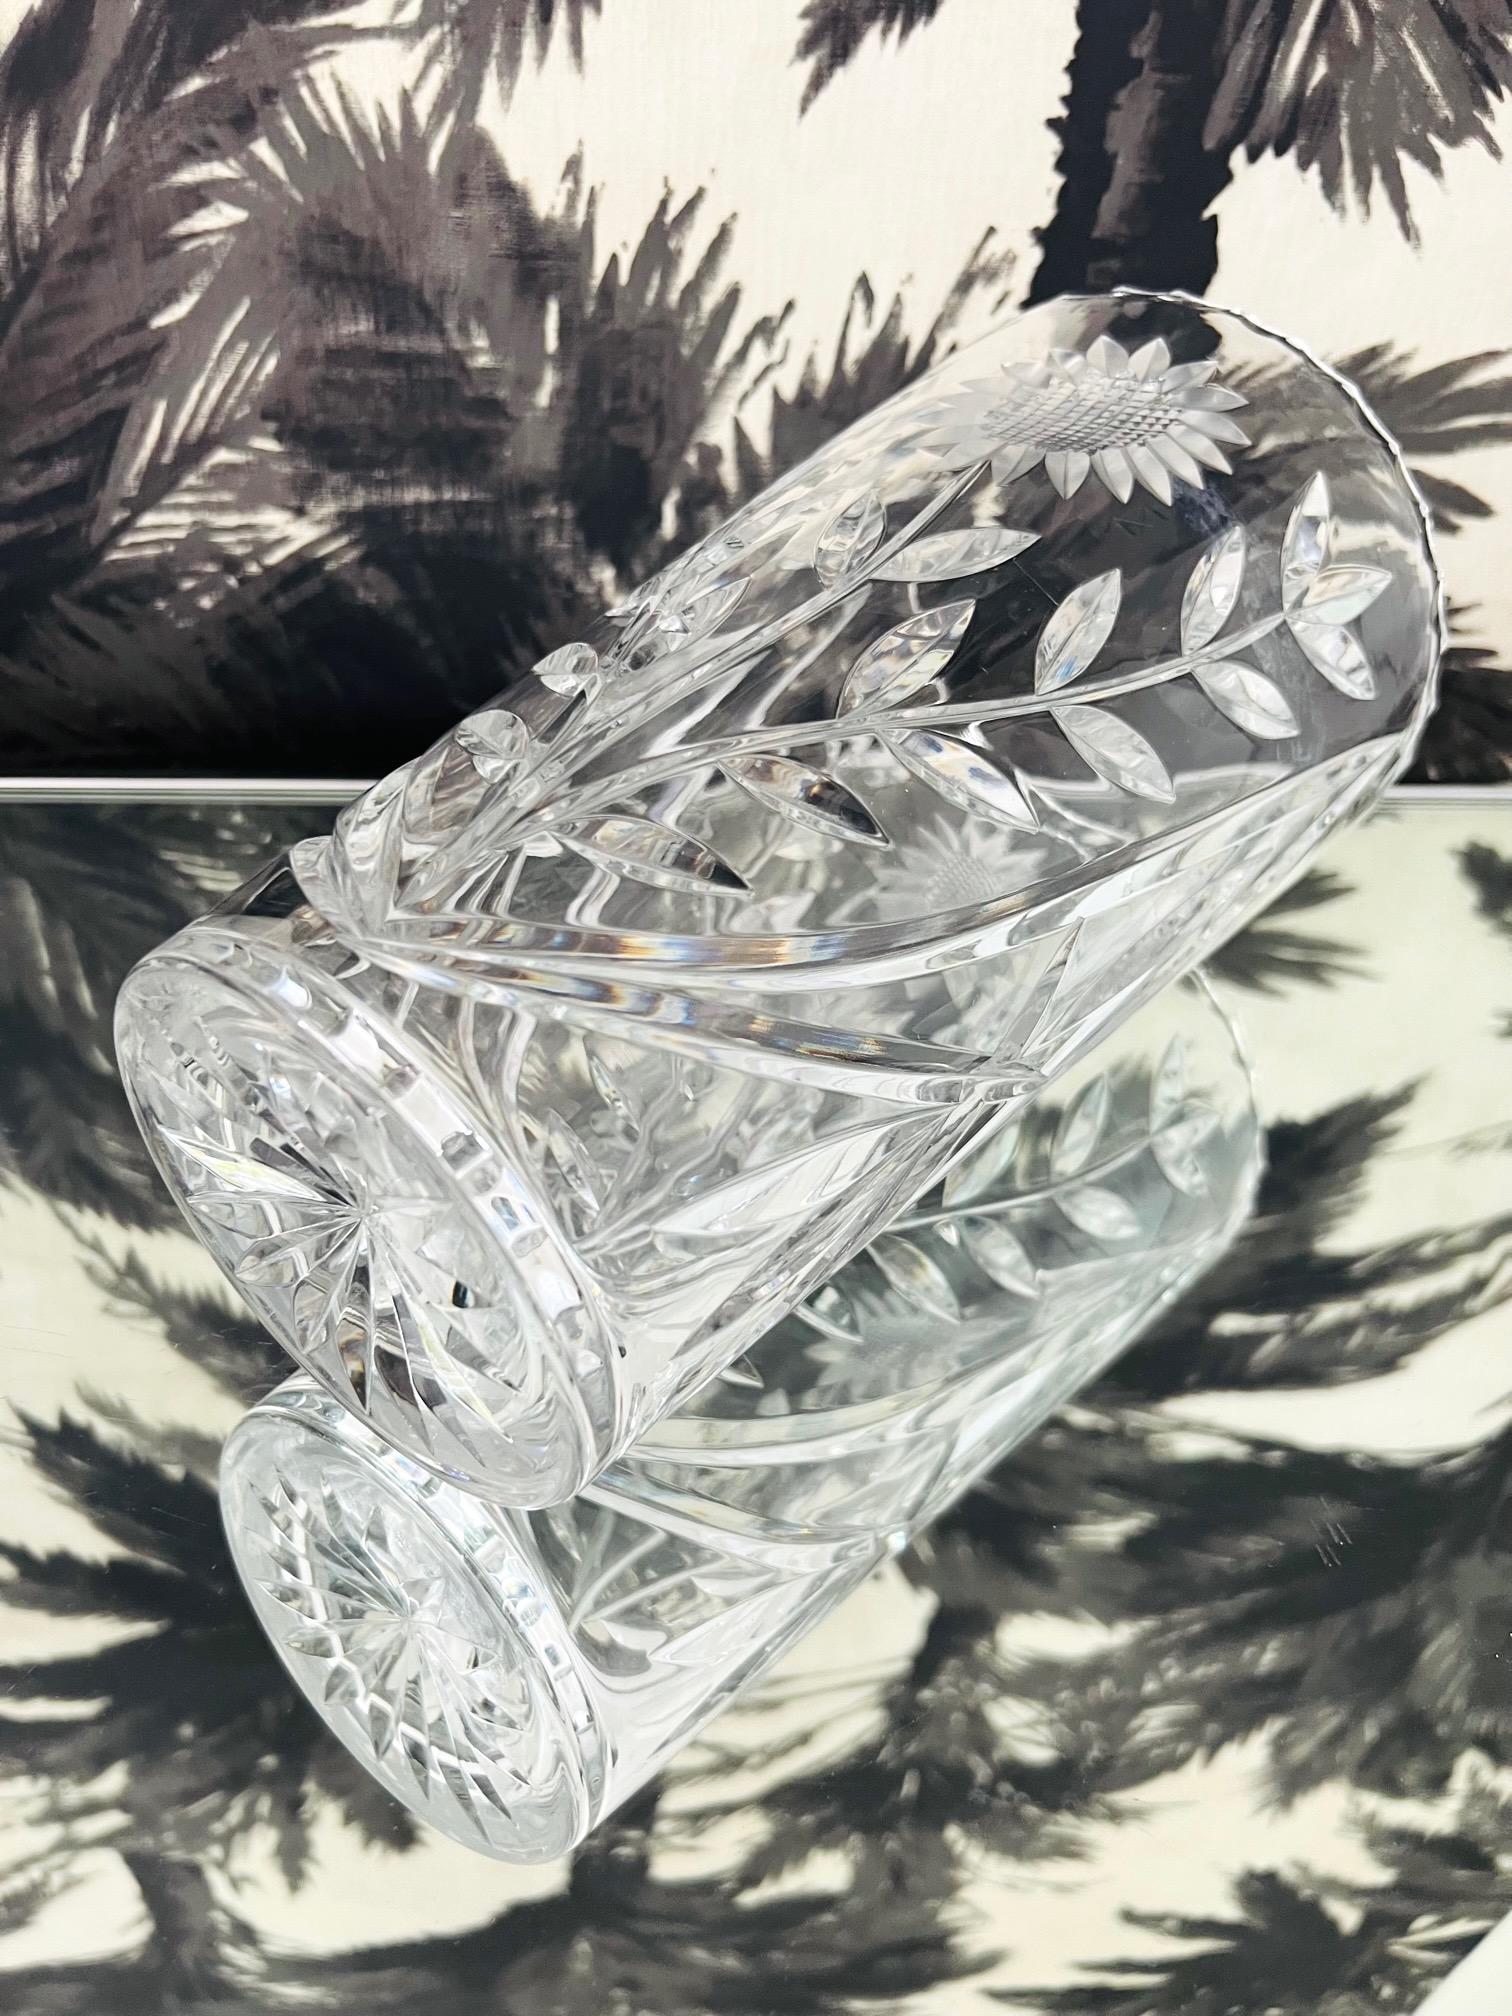 Contemporary Waterford Crystal Etched Sunflower Vase with Cut Glass Designs, England, c. 2010 For Sale